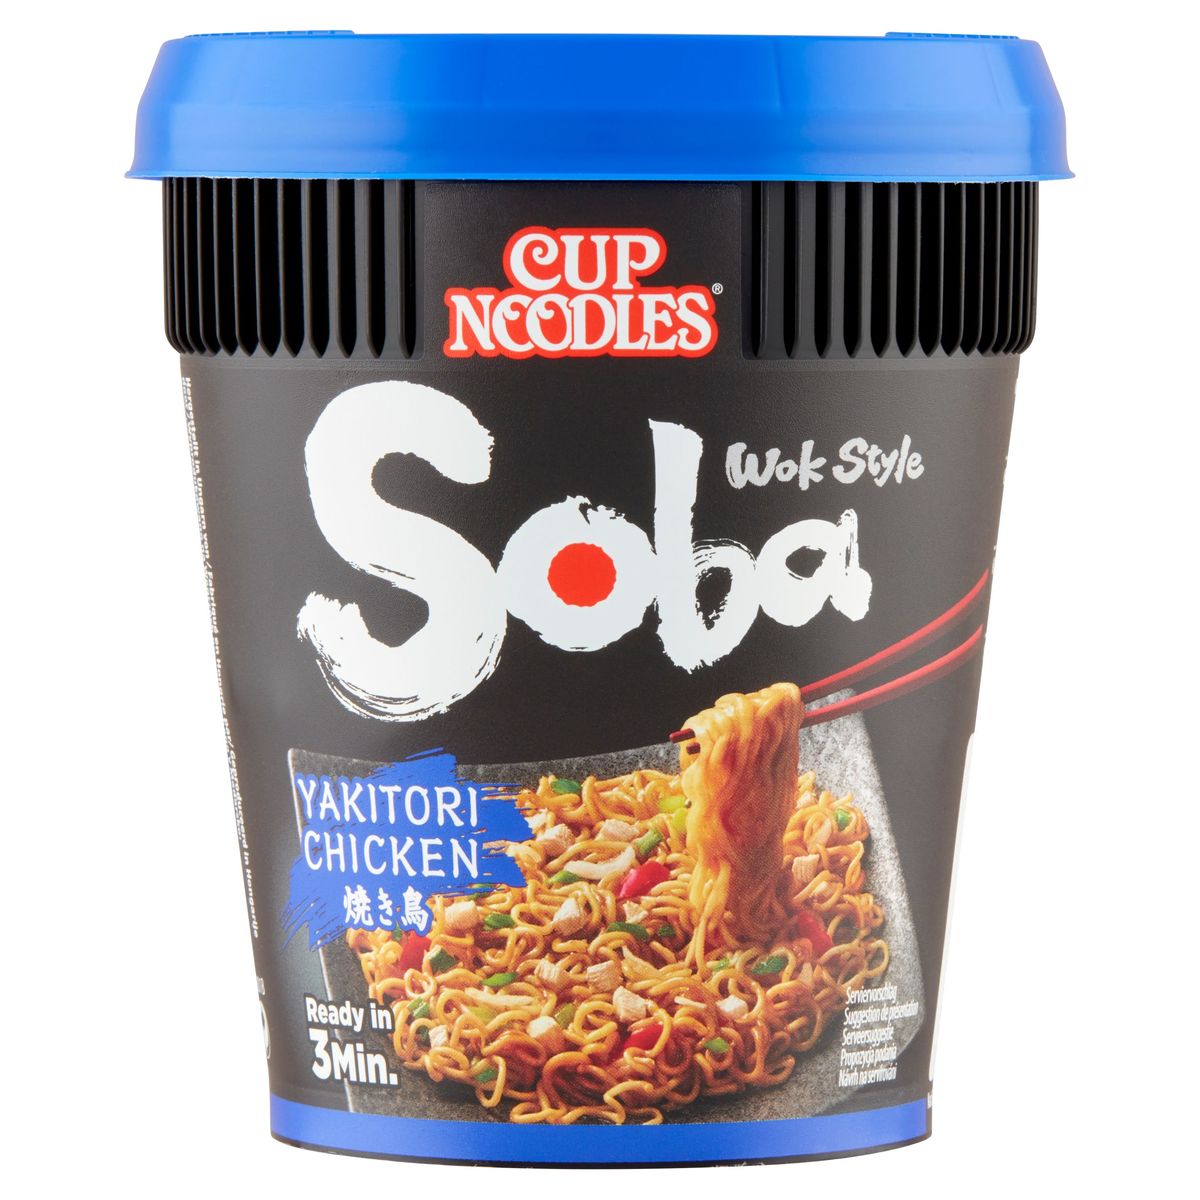 Nissin Cup Noodles Soba Wok Style Yakitori Chicken 89 g